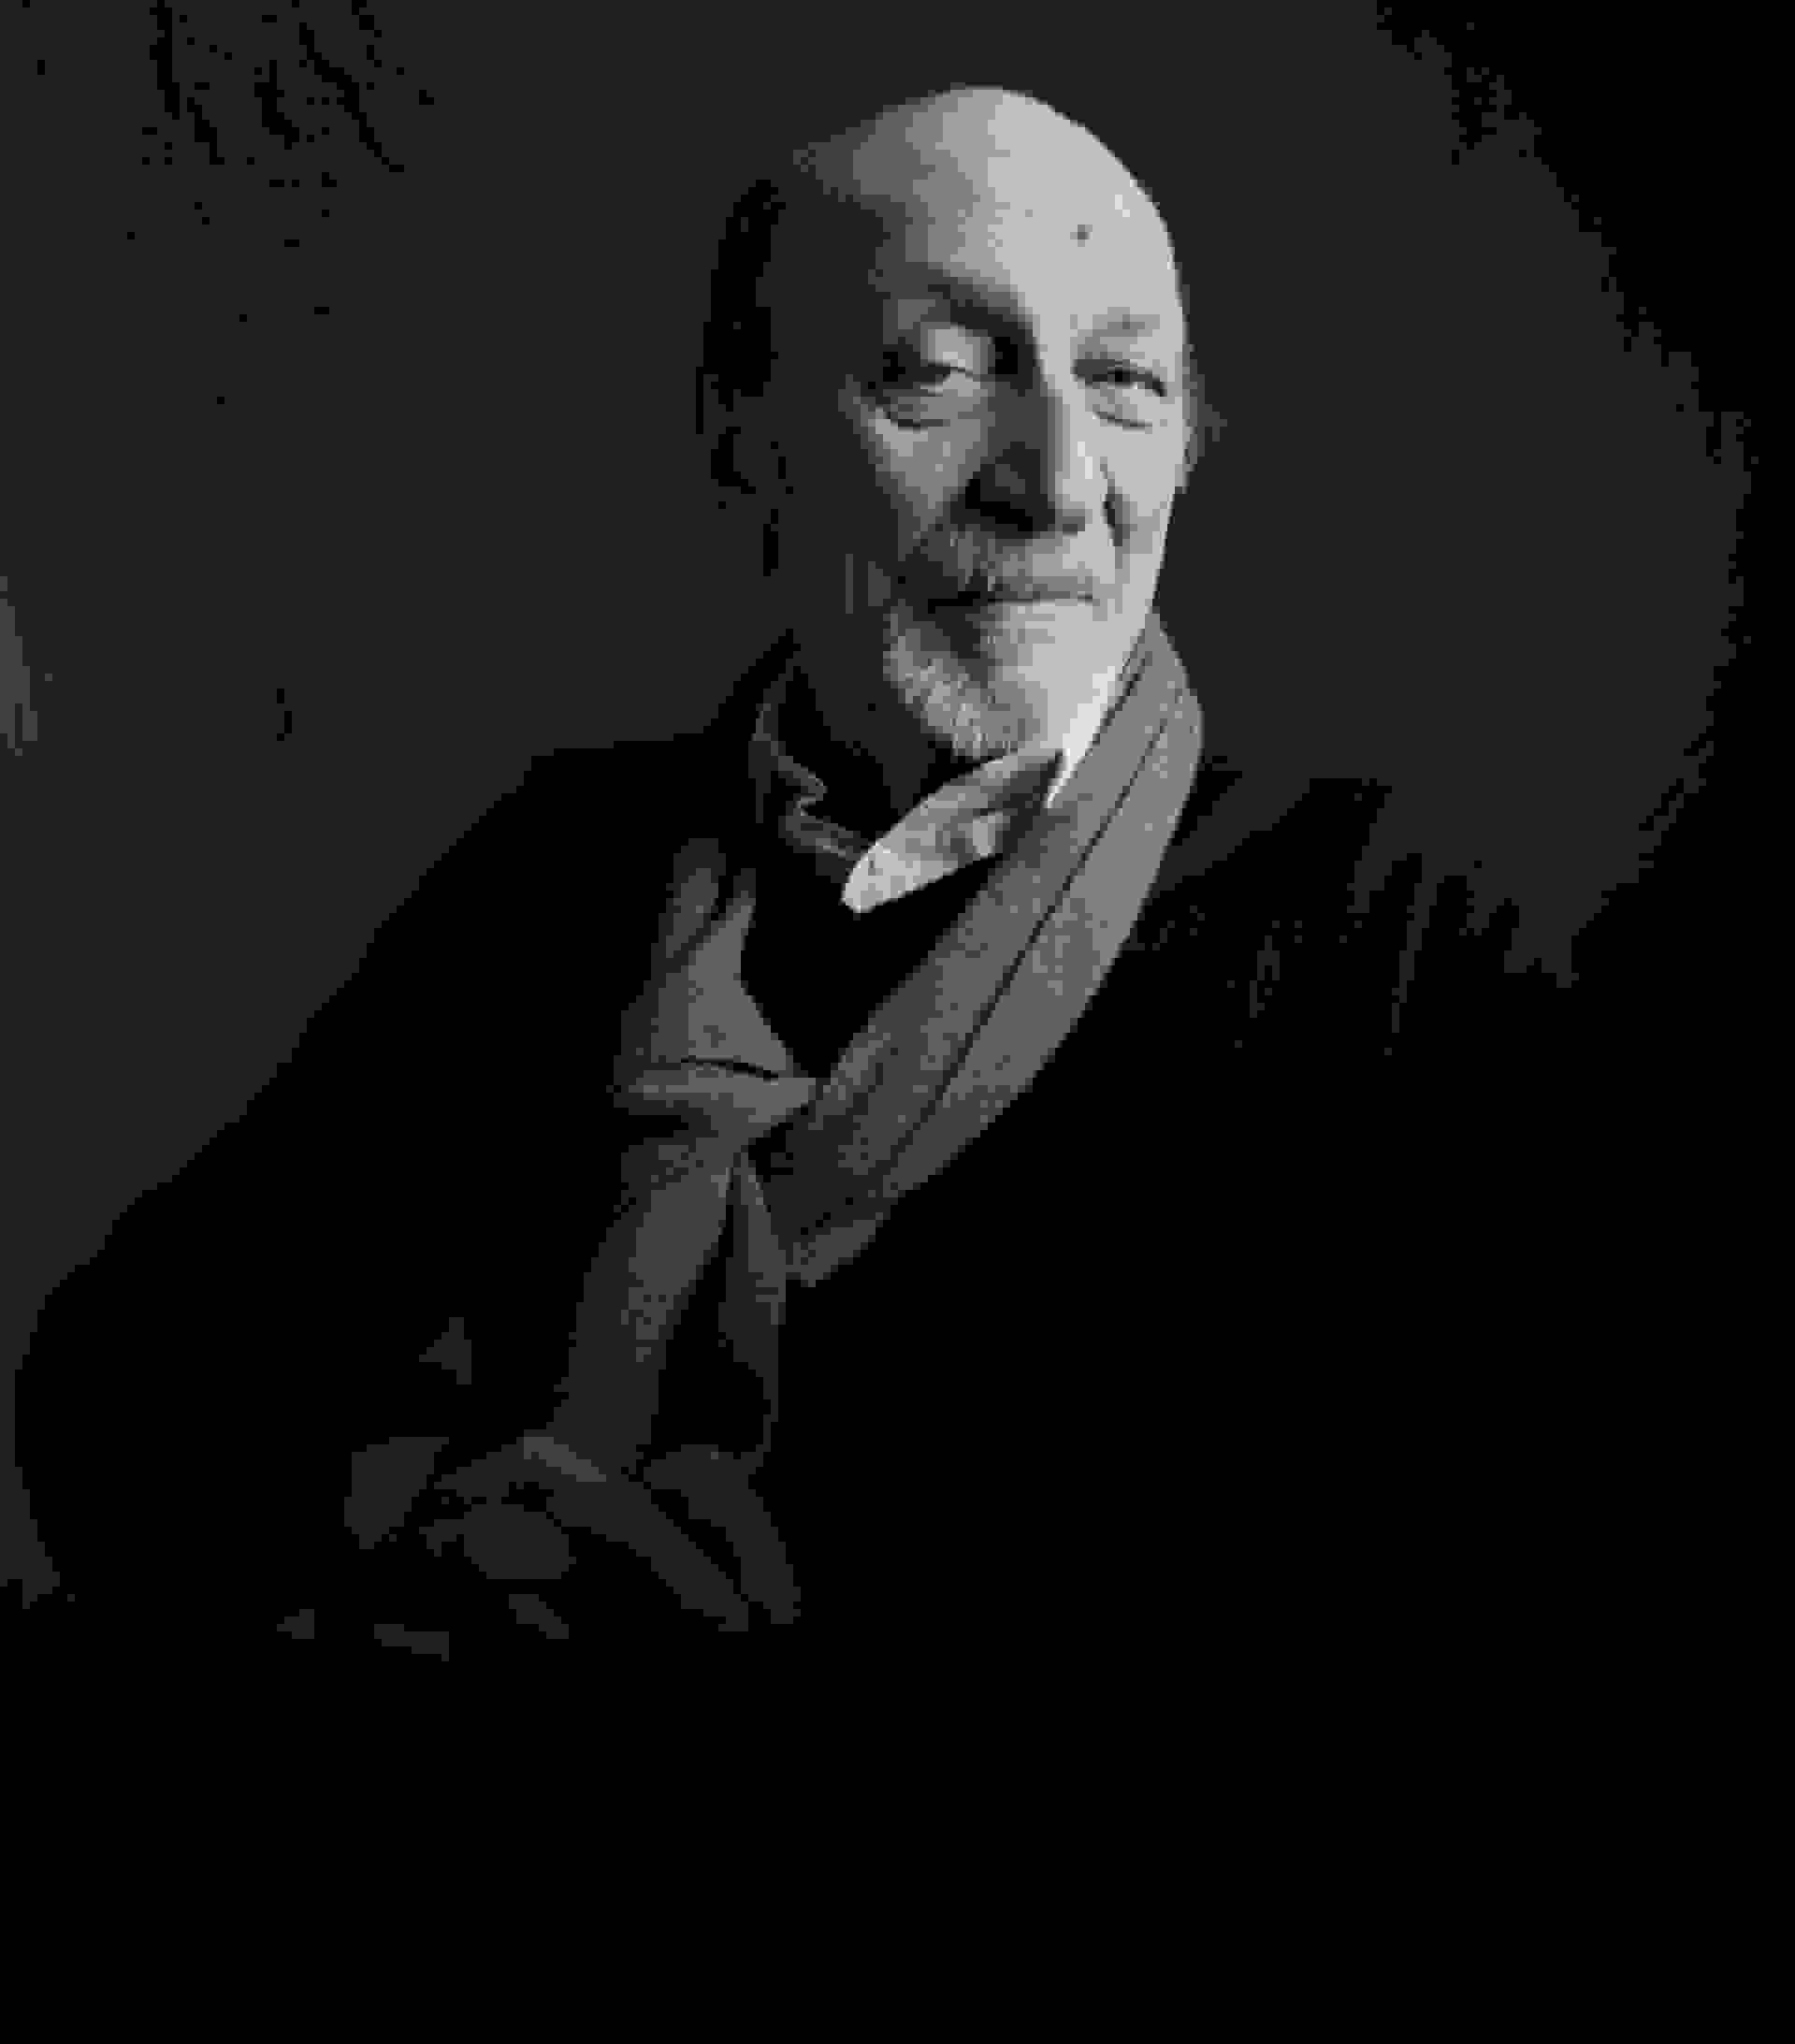 A black-and-white photograph of Milton Glaser.